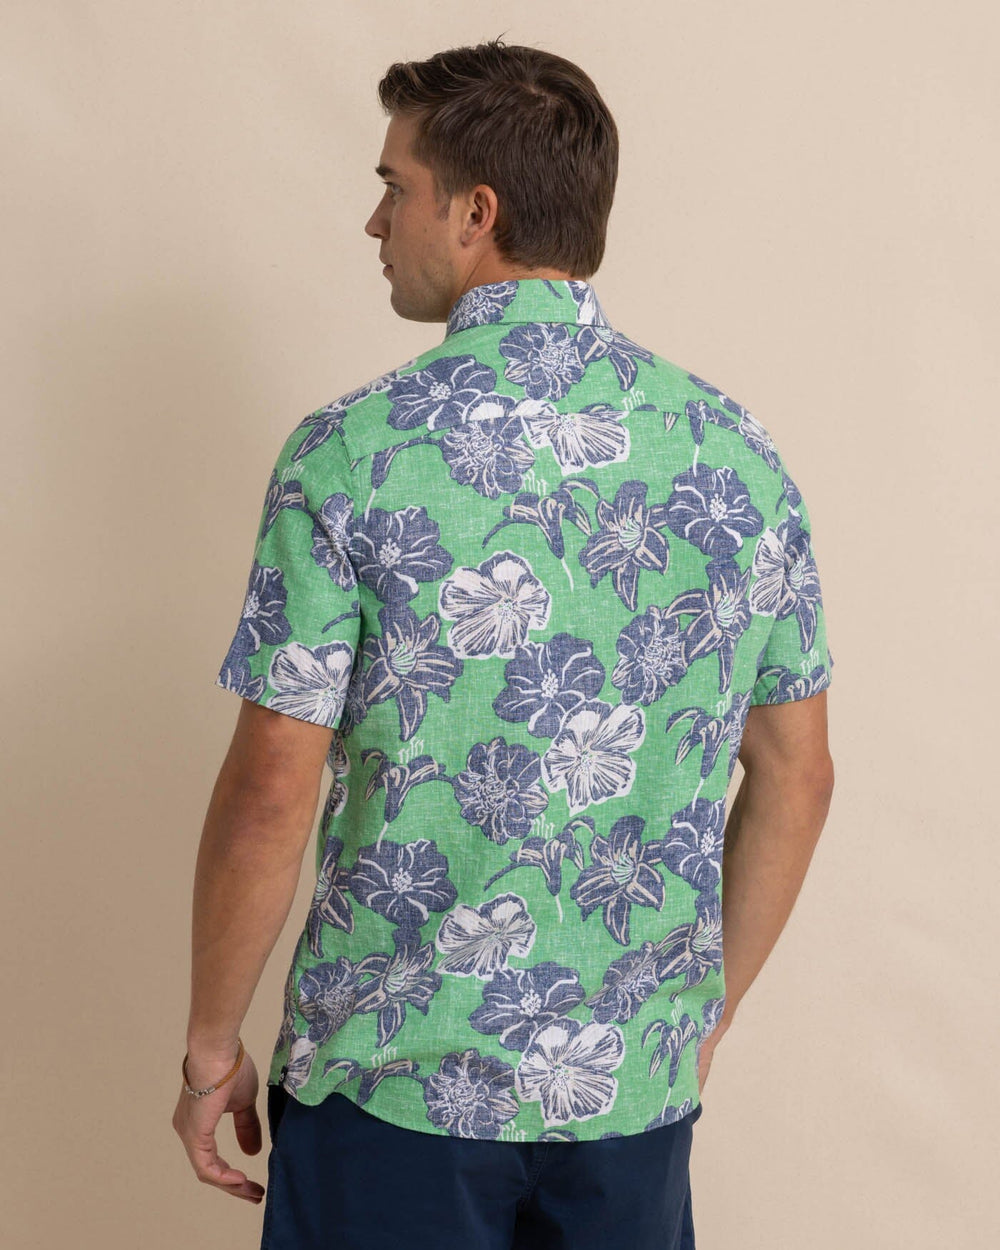 The back view of the Southern Tide Beach Blooms Linen Rayon Short Sleeve Sport Shirt by Southern Tide - Lawn Green